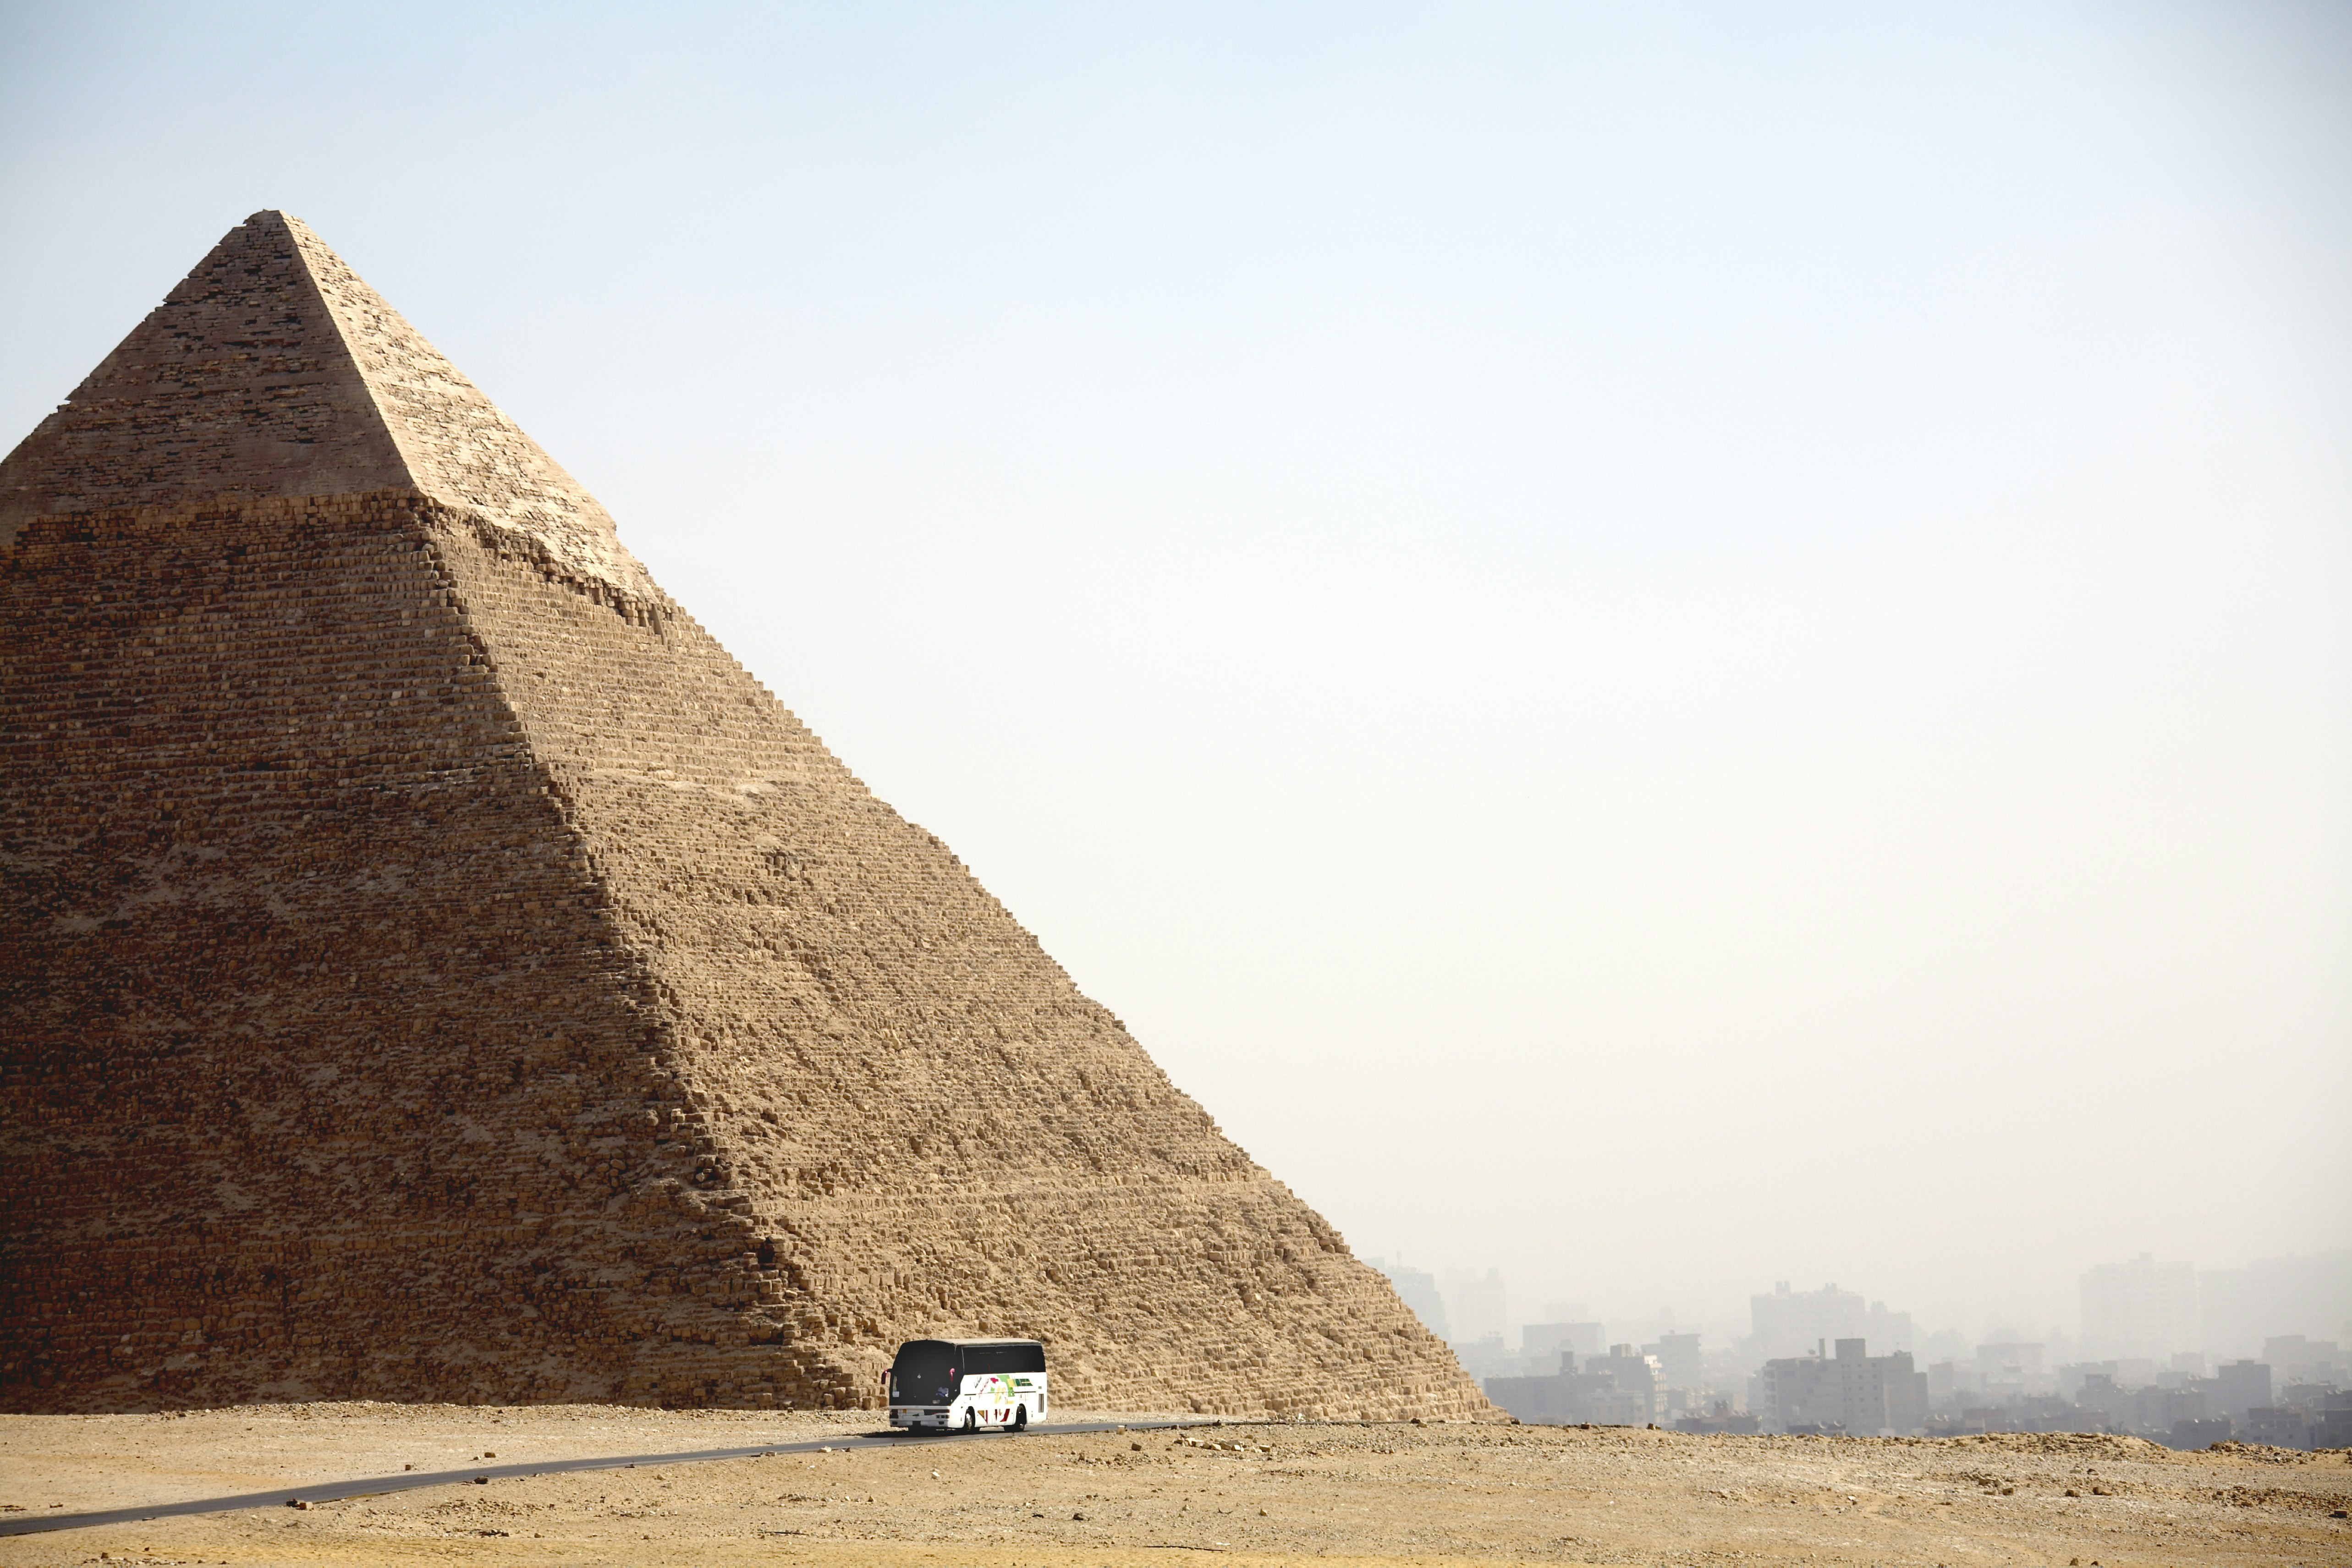 A bus drives past the Pyramids of Giza in Cairo, Egypt